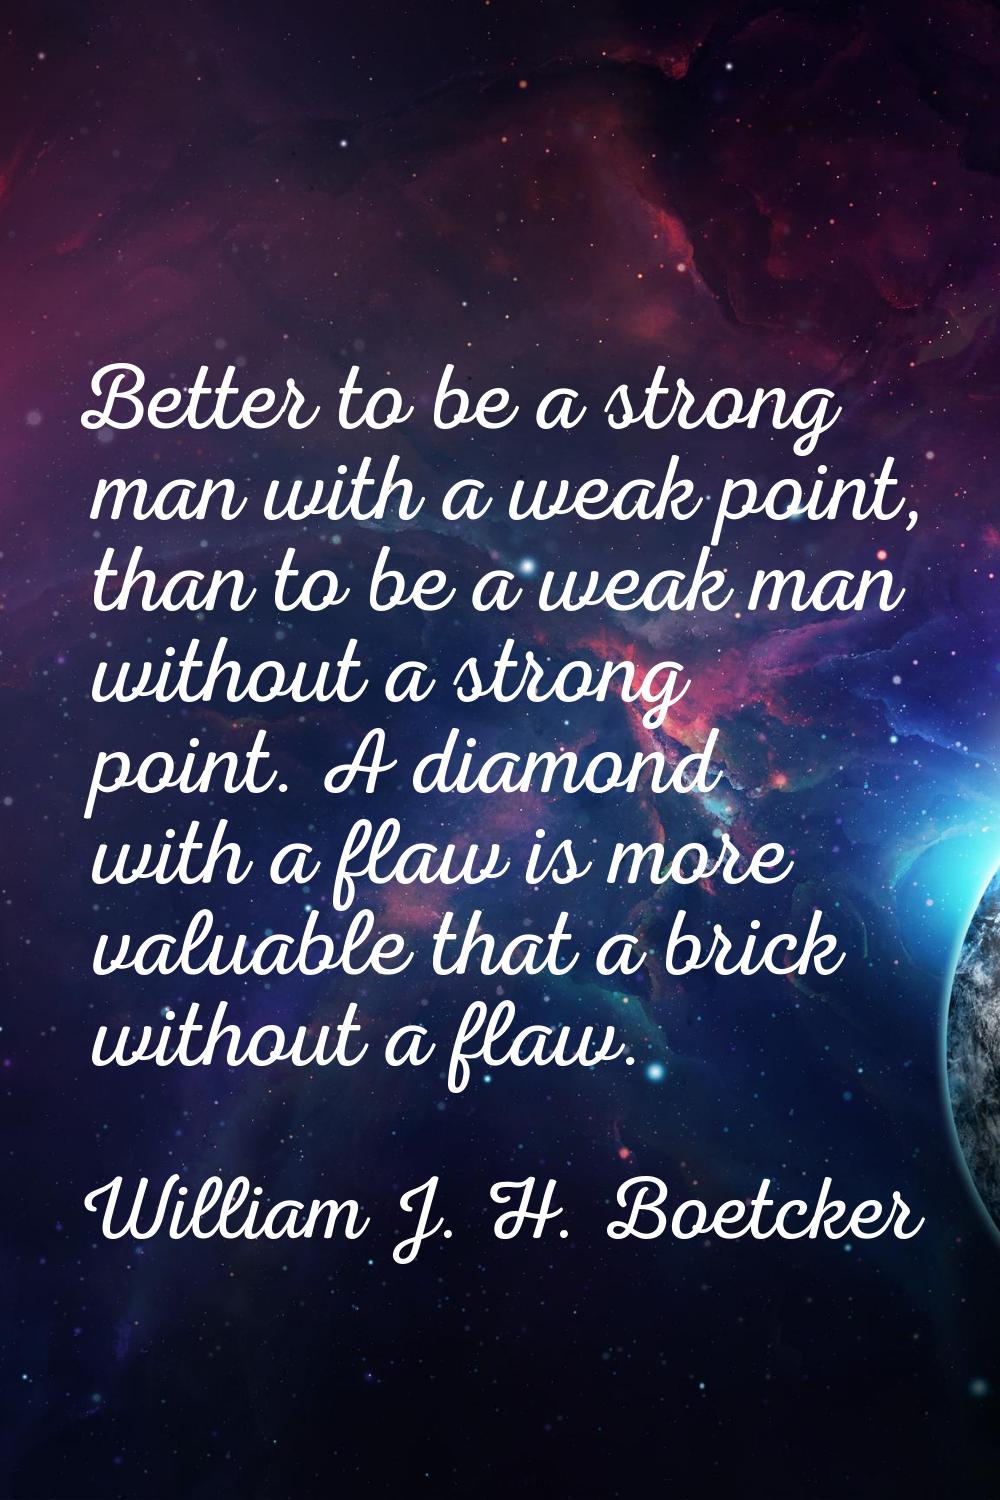 Better to be a strong man with a weak point, than to be a weak man without a strong point. A diamon